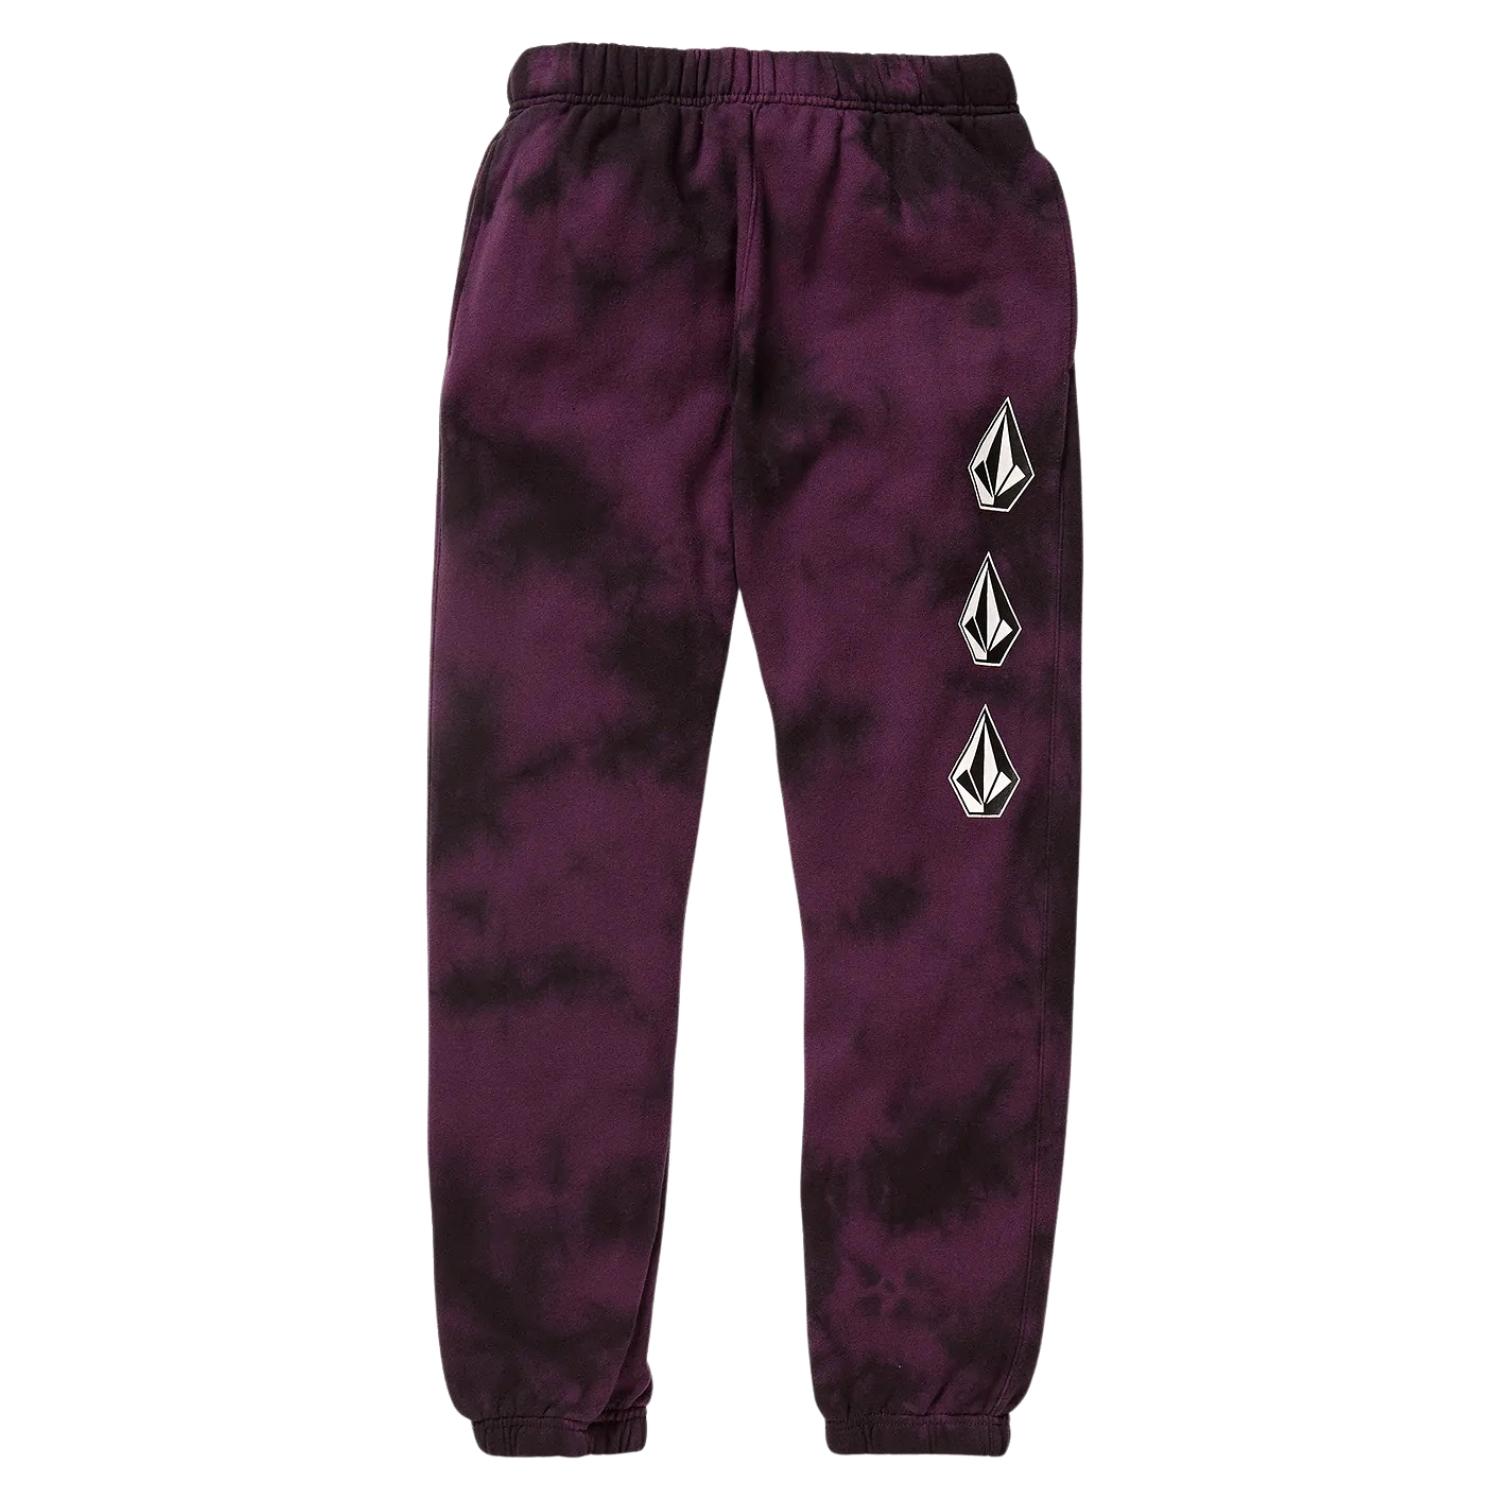 Volcom Youth Boys Iconic Stone Plus Fleece Joggers - Mulberry - Boys Joggers by Volcom